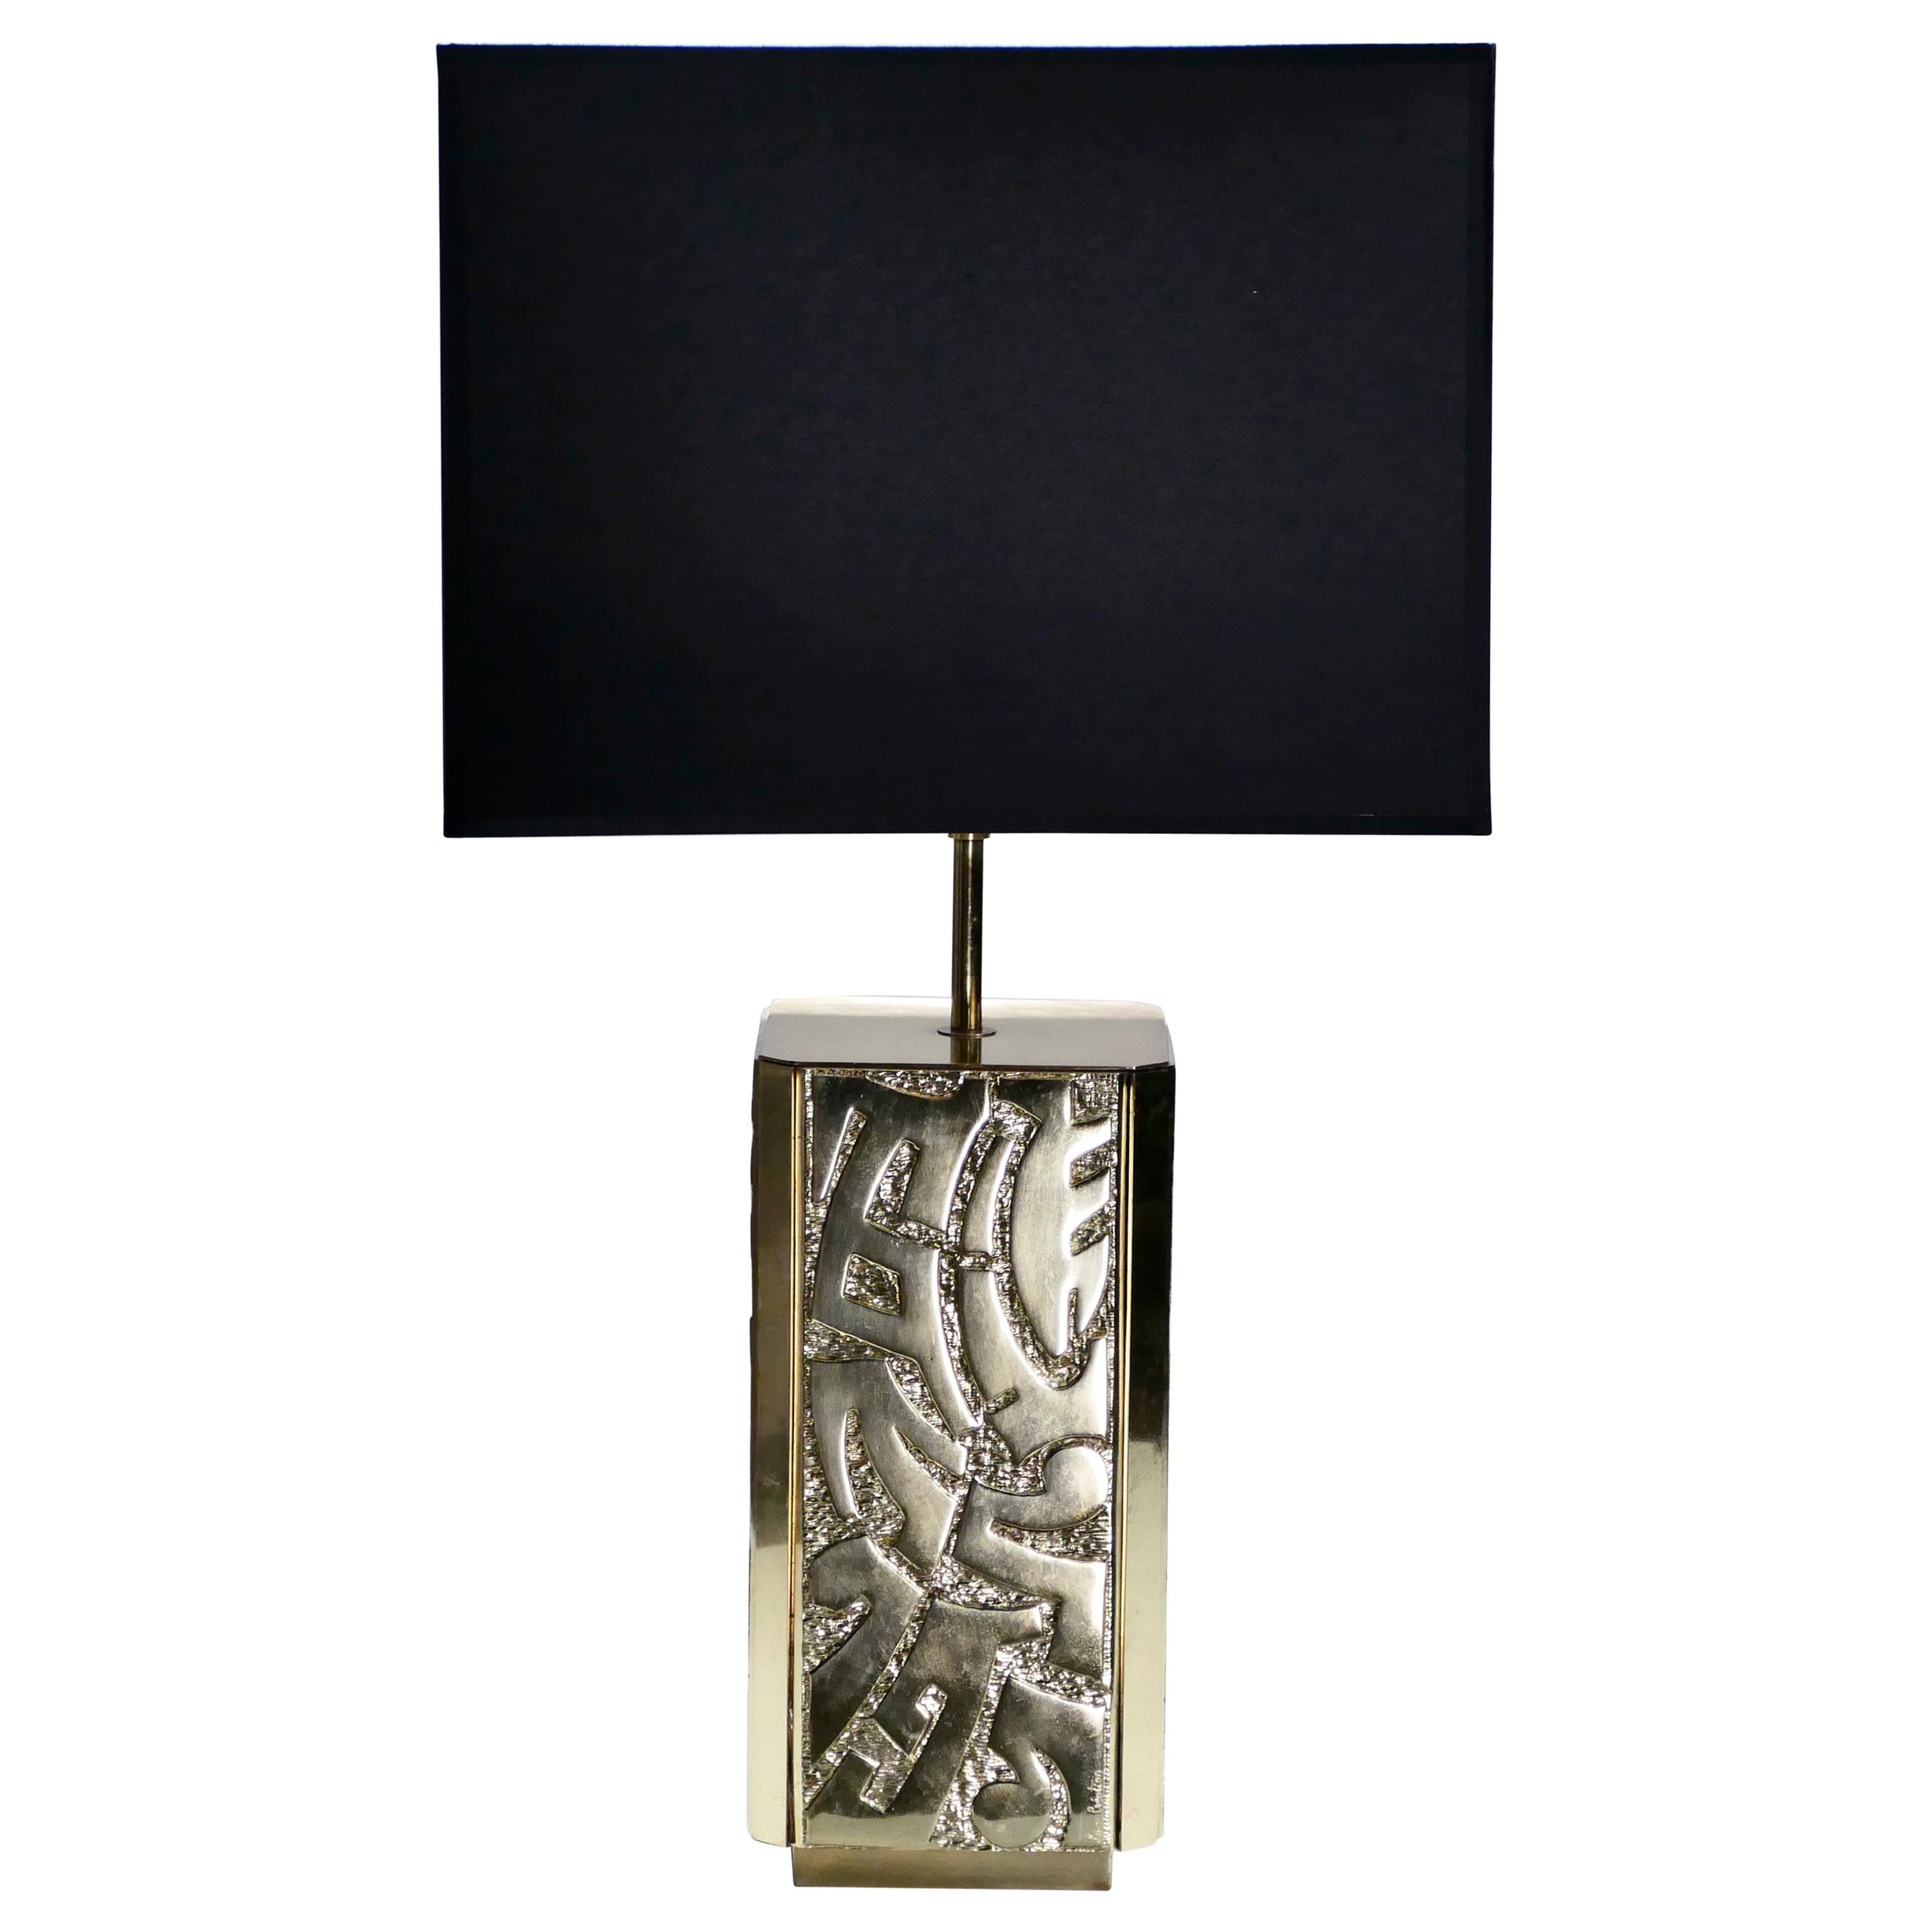 This large vintage table lamp is signed by Lova Creation. The sculptural quality of the piece is visually arresting, bronze shaped delicately into abstract forms all along the base. Silky texture of the foreground contrasts the ridged texture of the